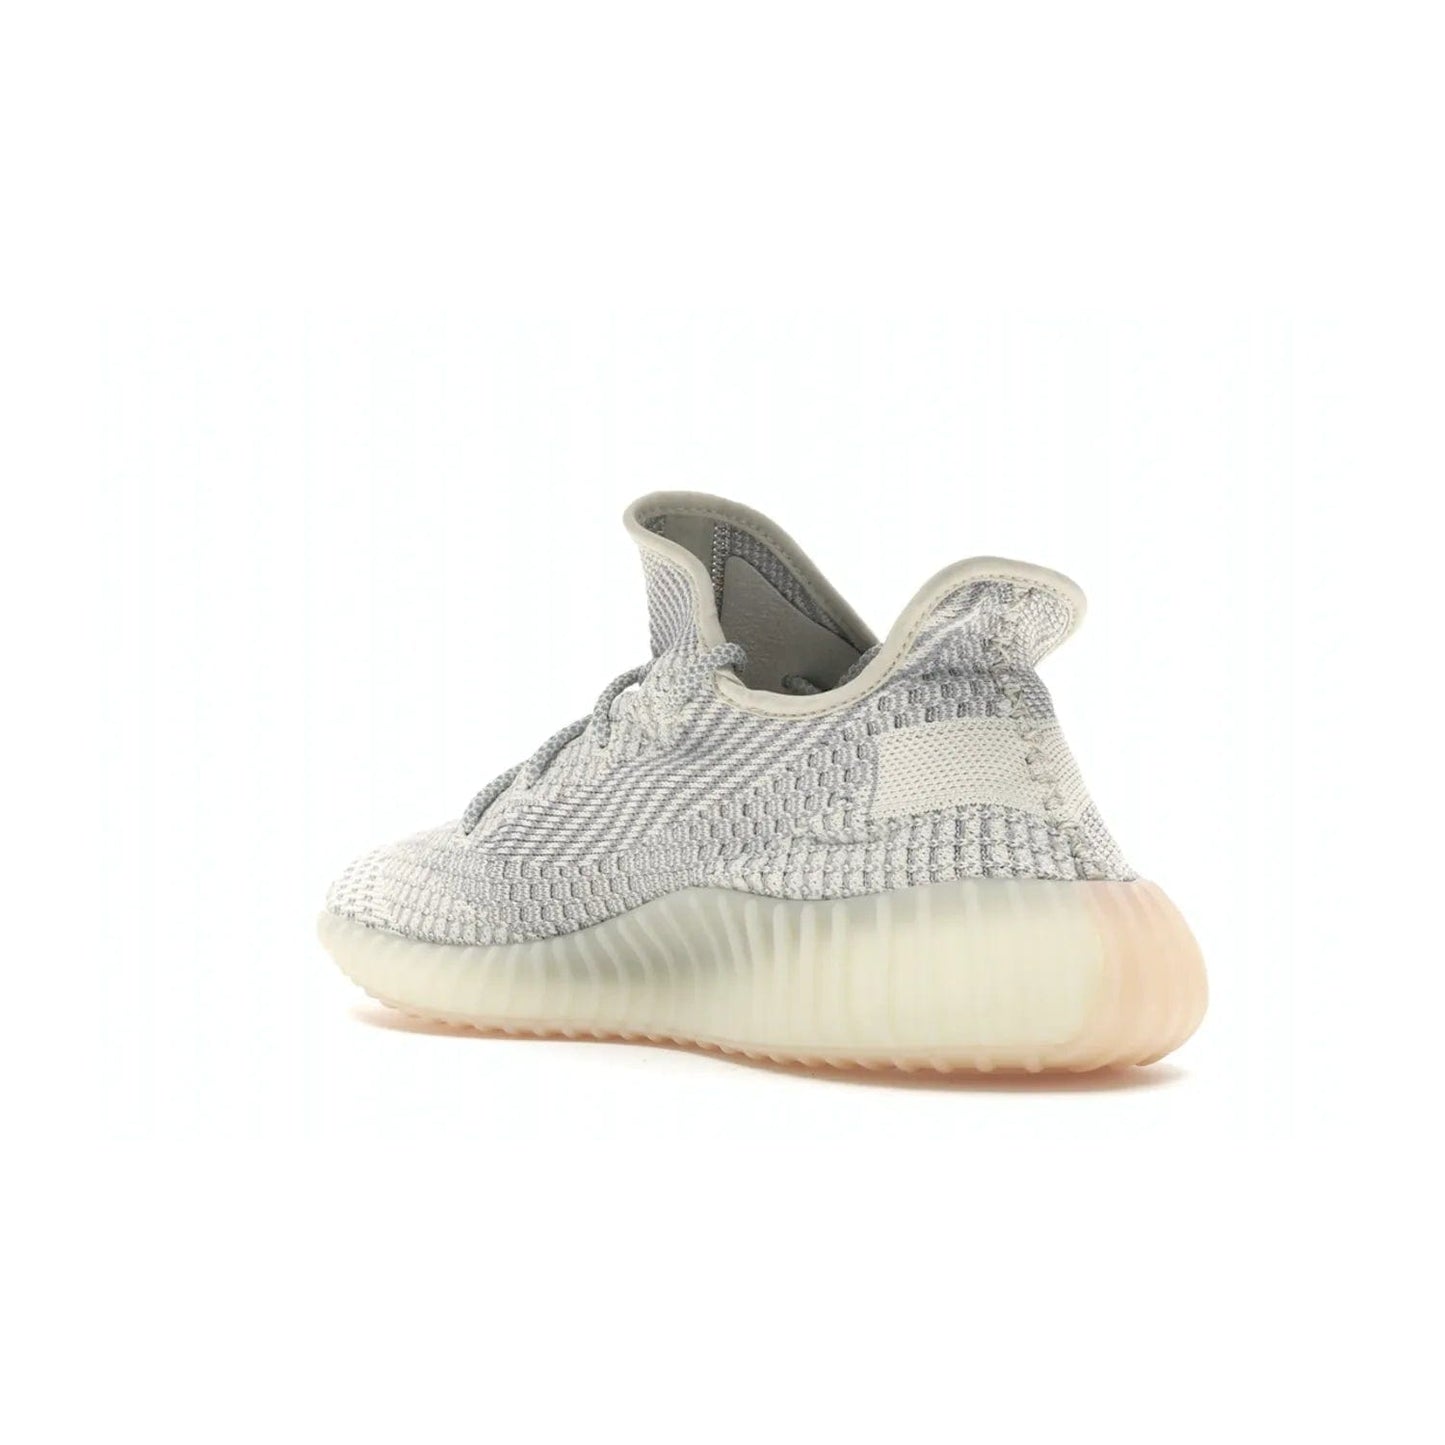 adidas Yeezy Boost 350 V2 Lundmark (Non Reflective) - Image 24 - Only at www.BallersClubKickz.com - Shop the exclusive adidas Yeezy Boost 350 V2 Lundmark with a subtle summer color, mesh upper, white-to-cream transitional midsole, light tan outsole, and pink middle stripe. Comfort and style come together in this perfect summer 350 V2. Released on July 11, 2019.